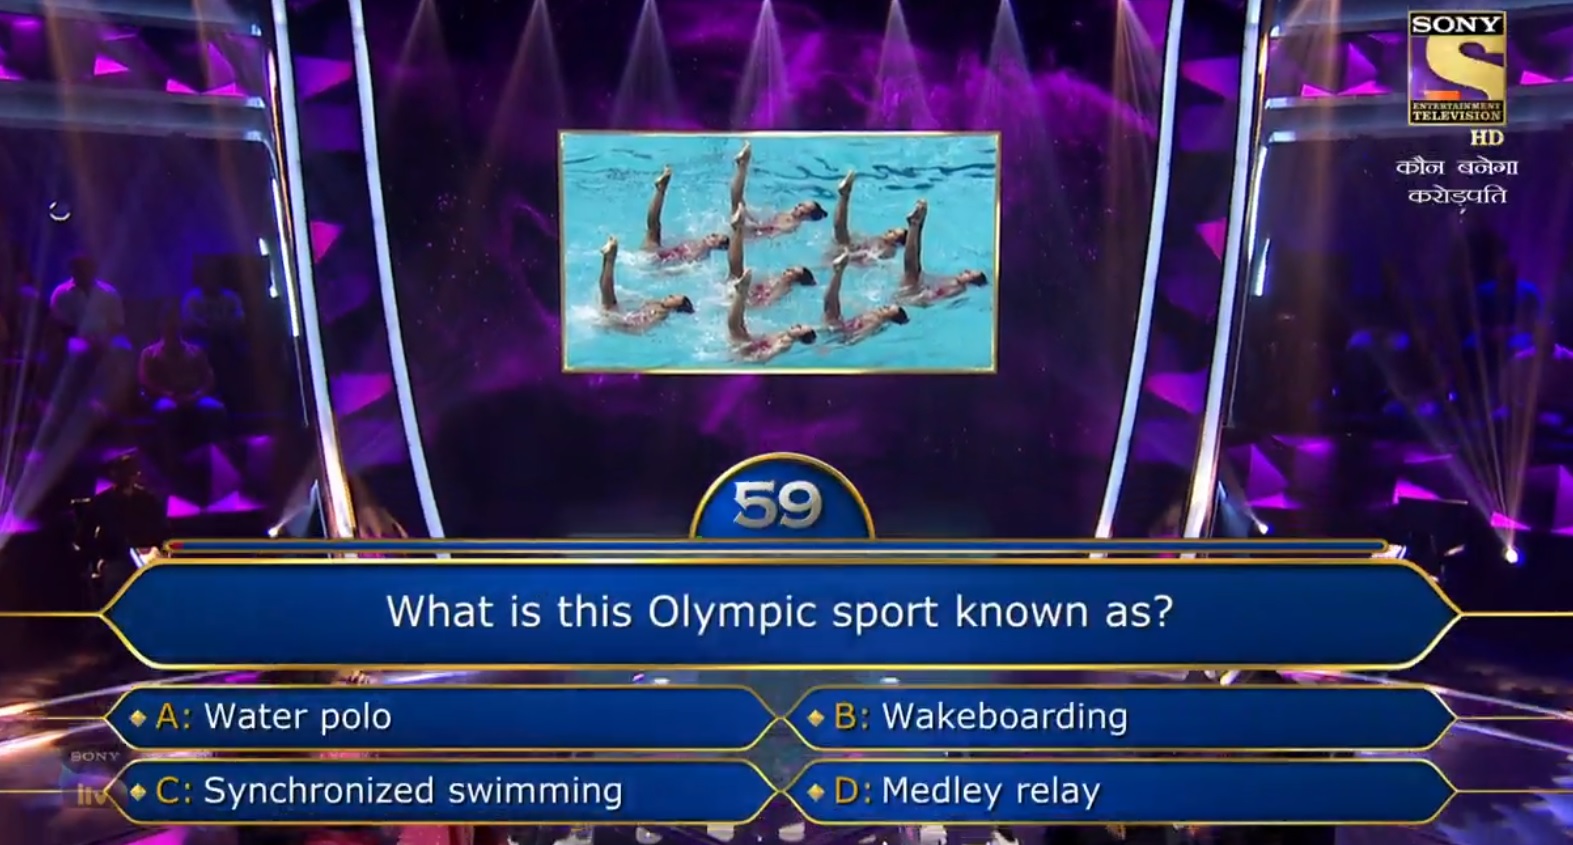 Ques : What is this Olympic sport known as?